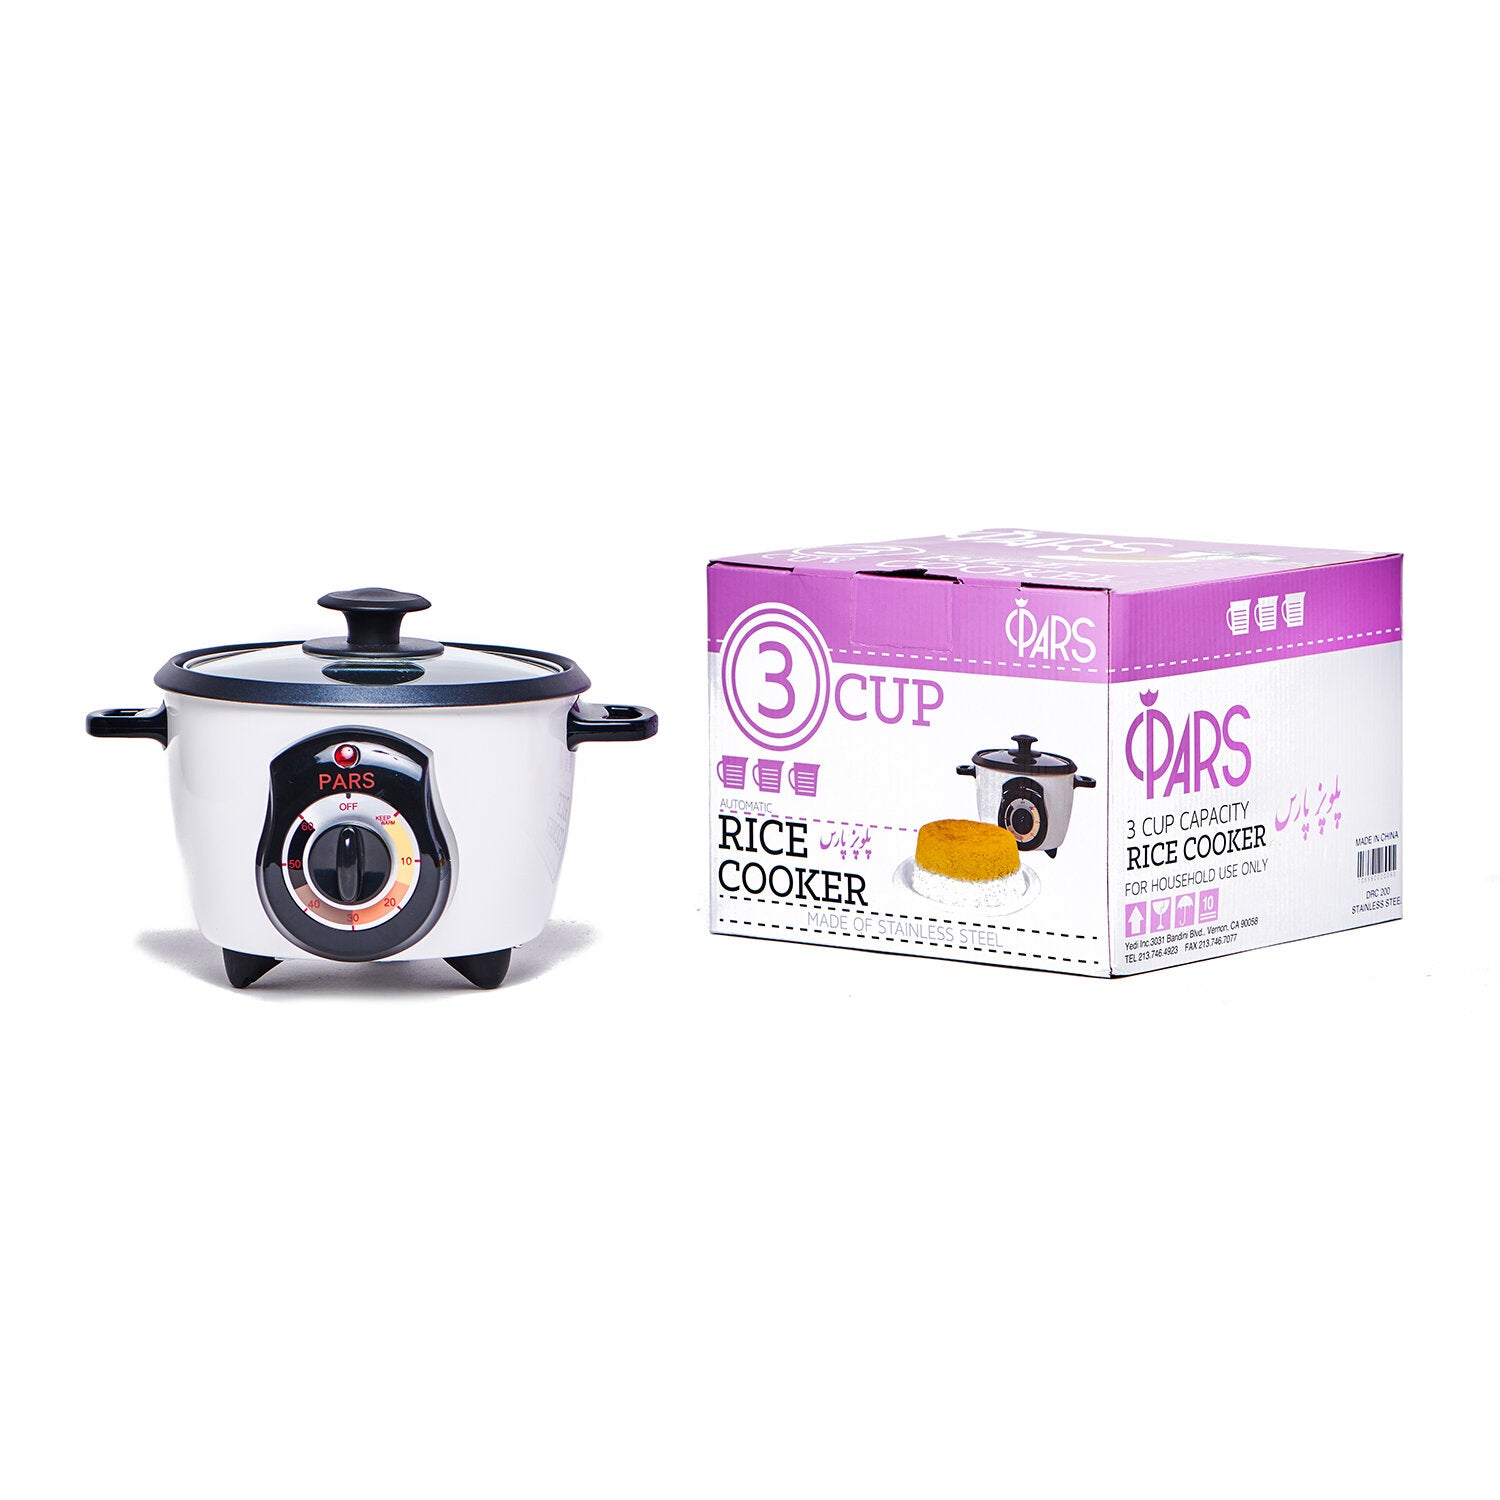 Pars 3 Cup Rice Cooker - Polopaz - پلوپز